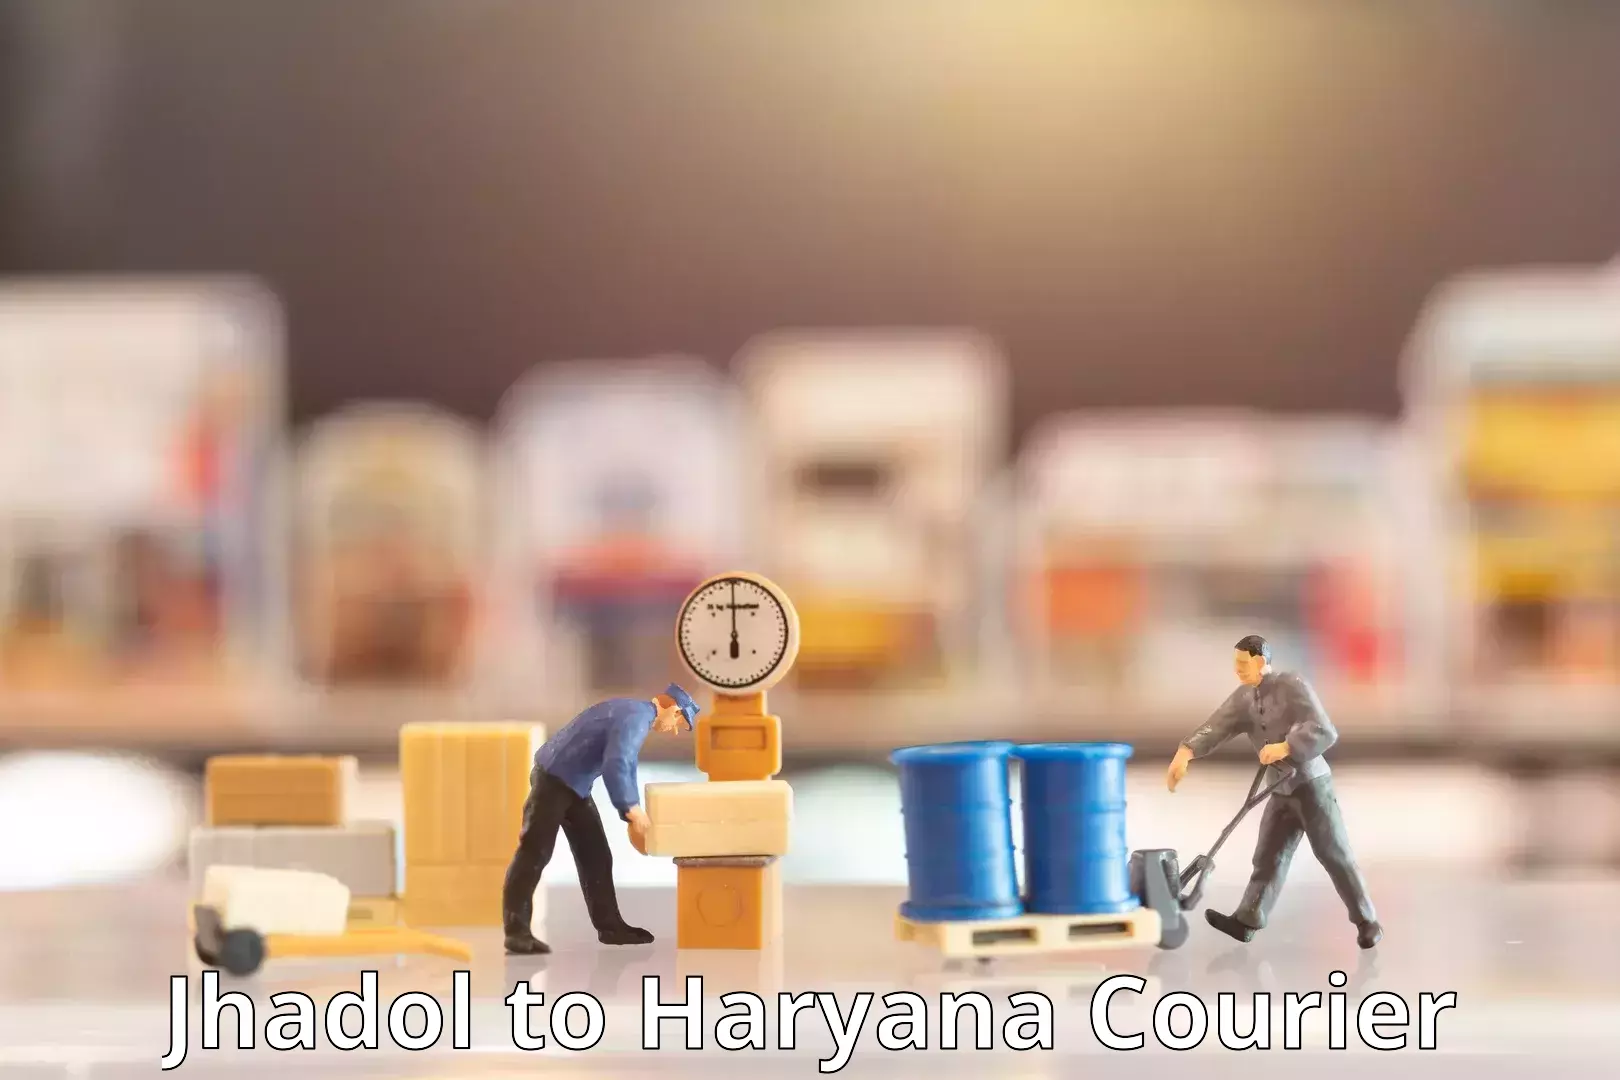 State-of-the-art courier technology Jhadol to Gurgaon